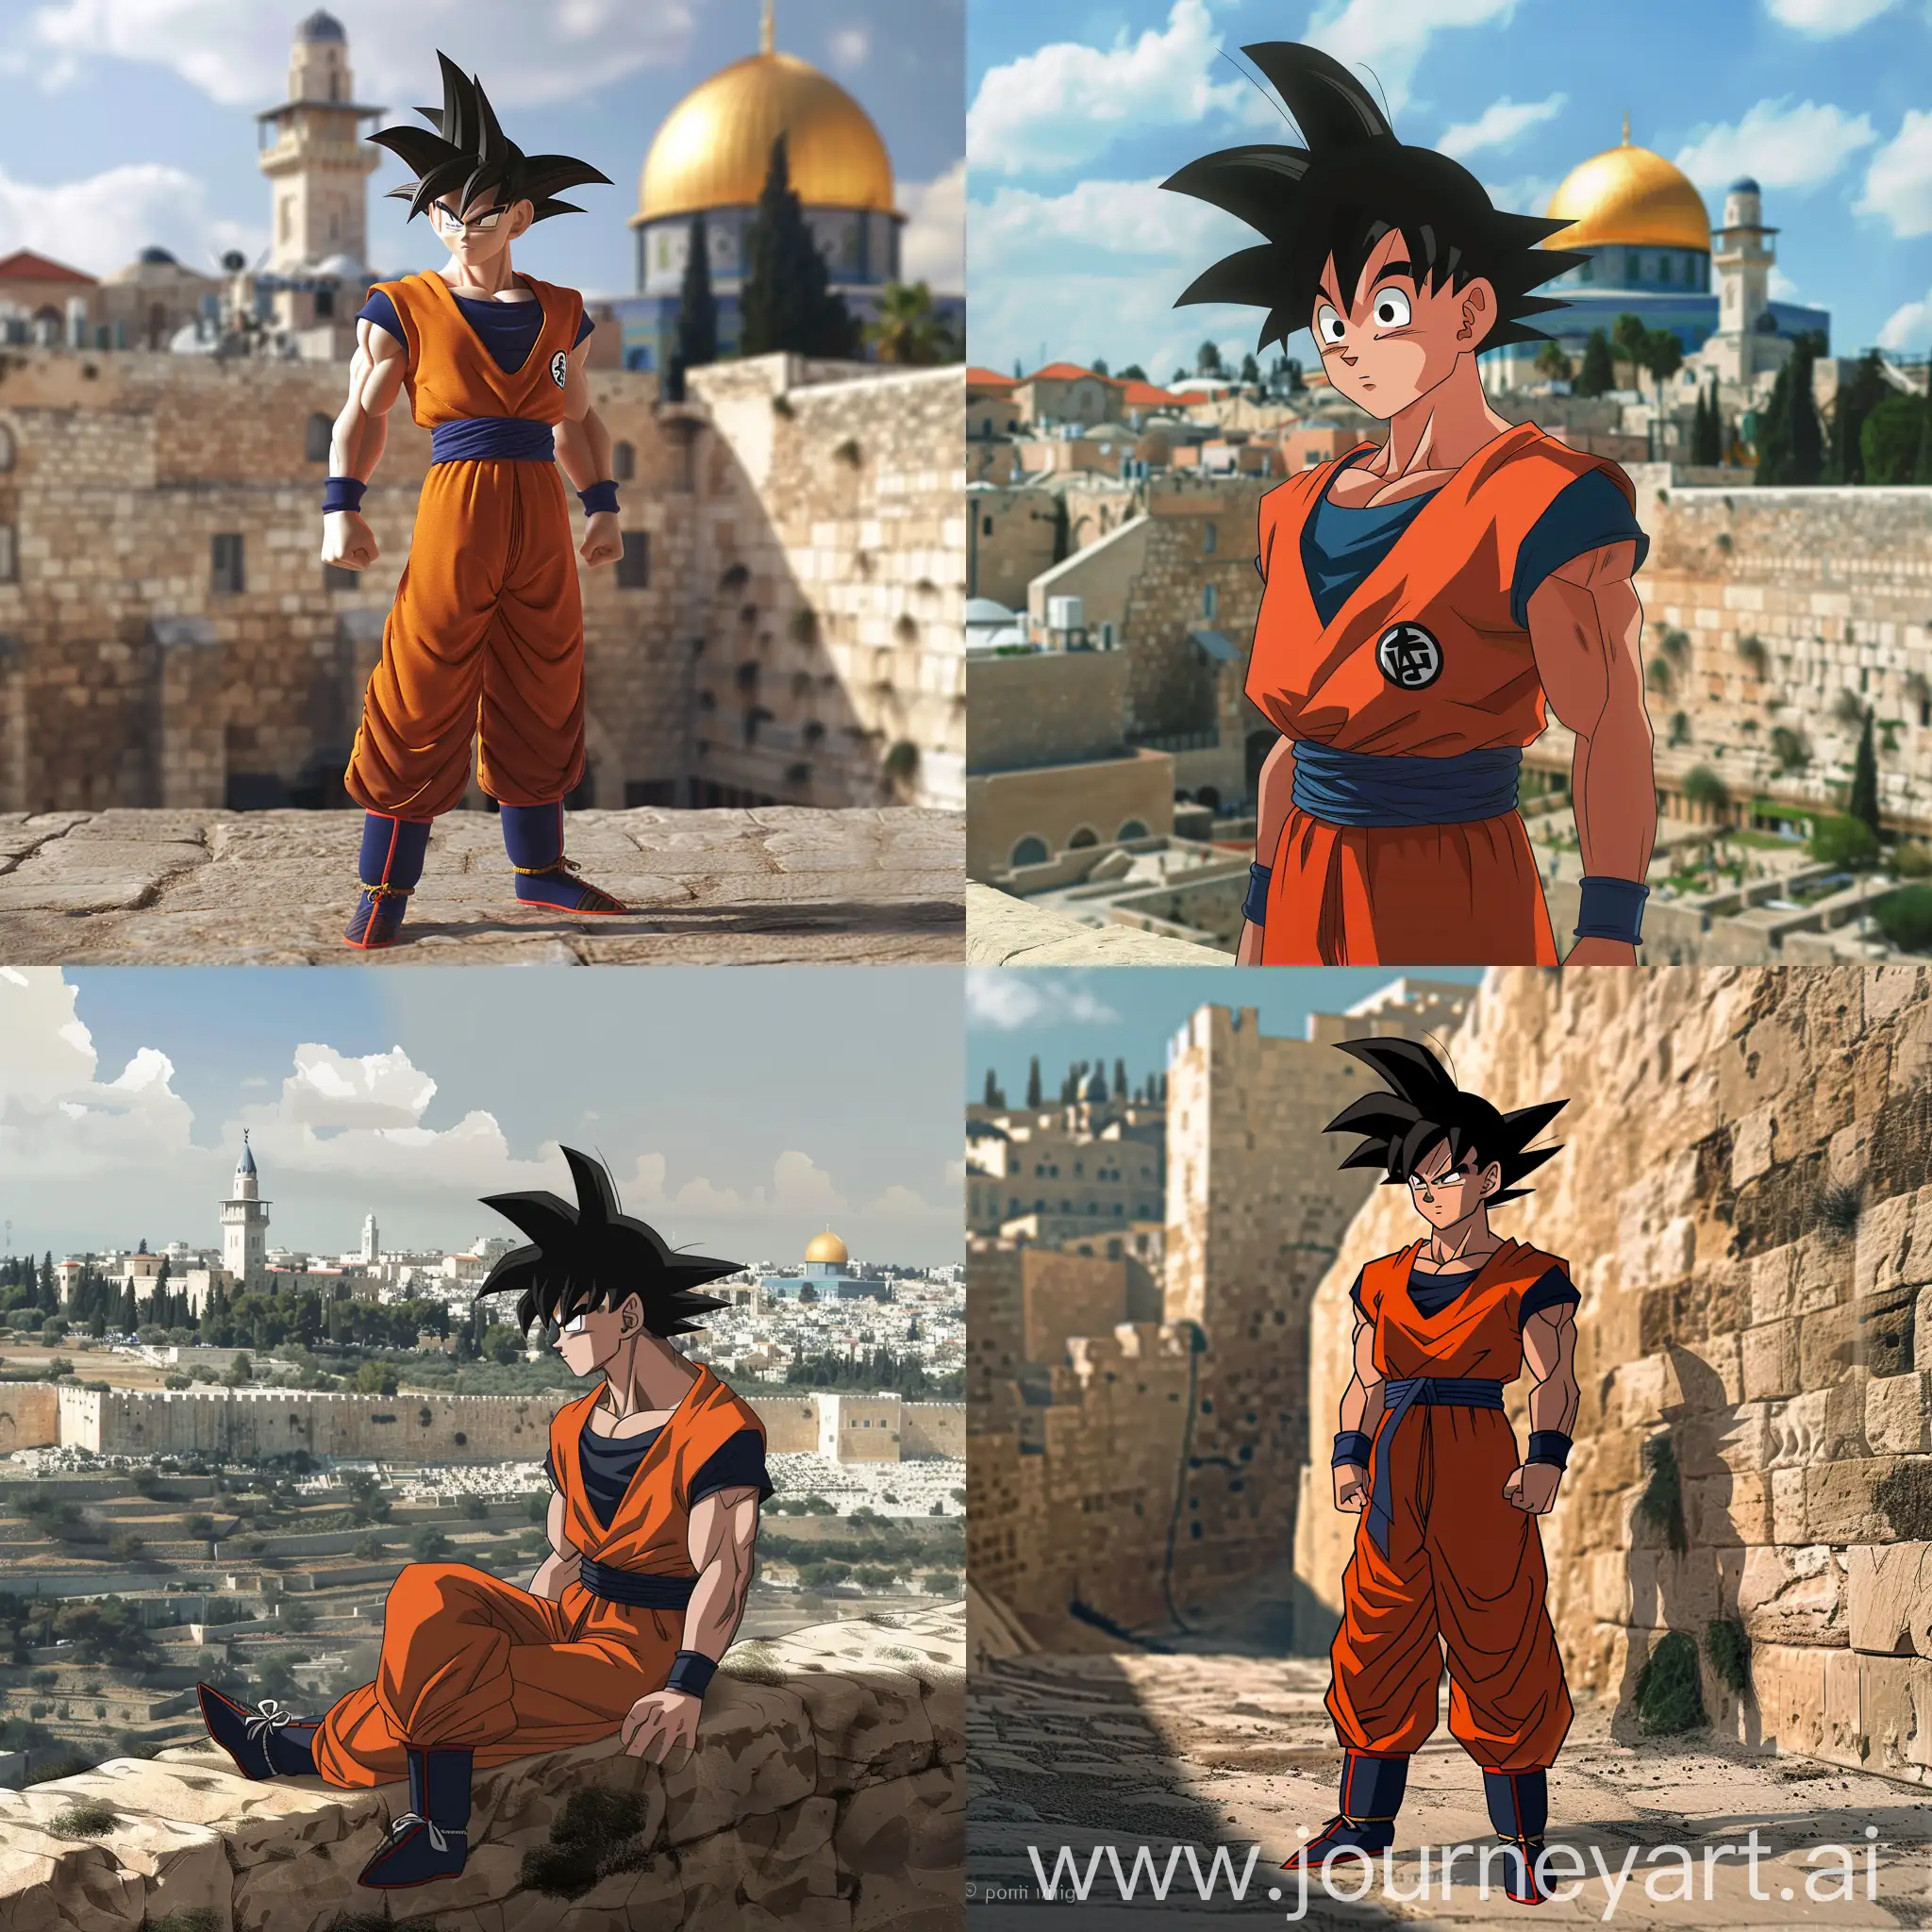 Goku-2D-Style-in-AlAqsa-Palestine-Epic-Warrior-Amidst-Ancient-Architecture